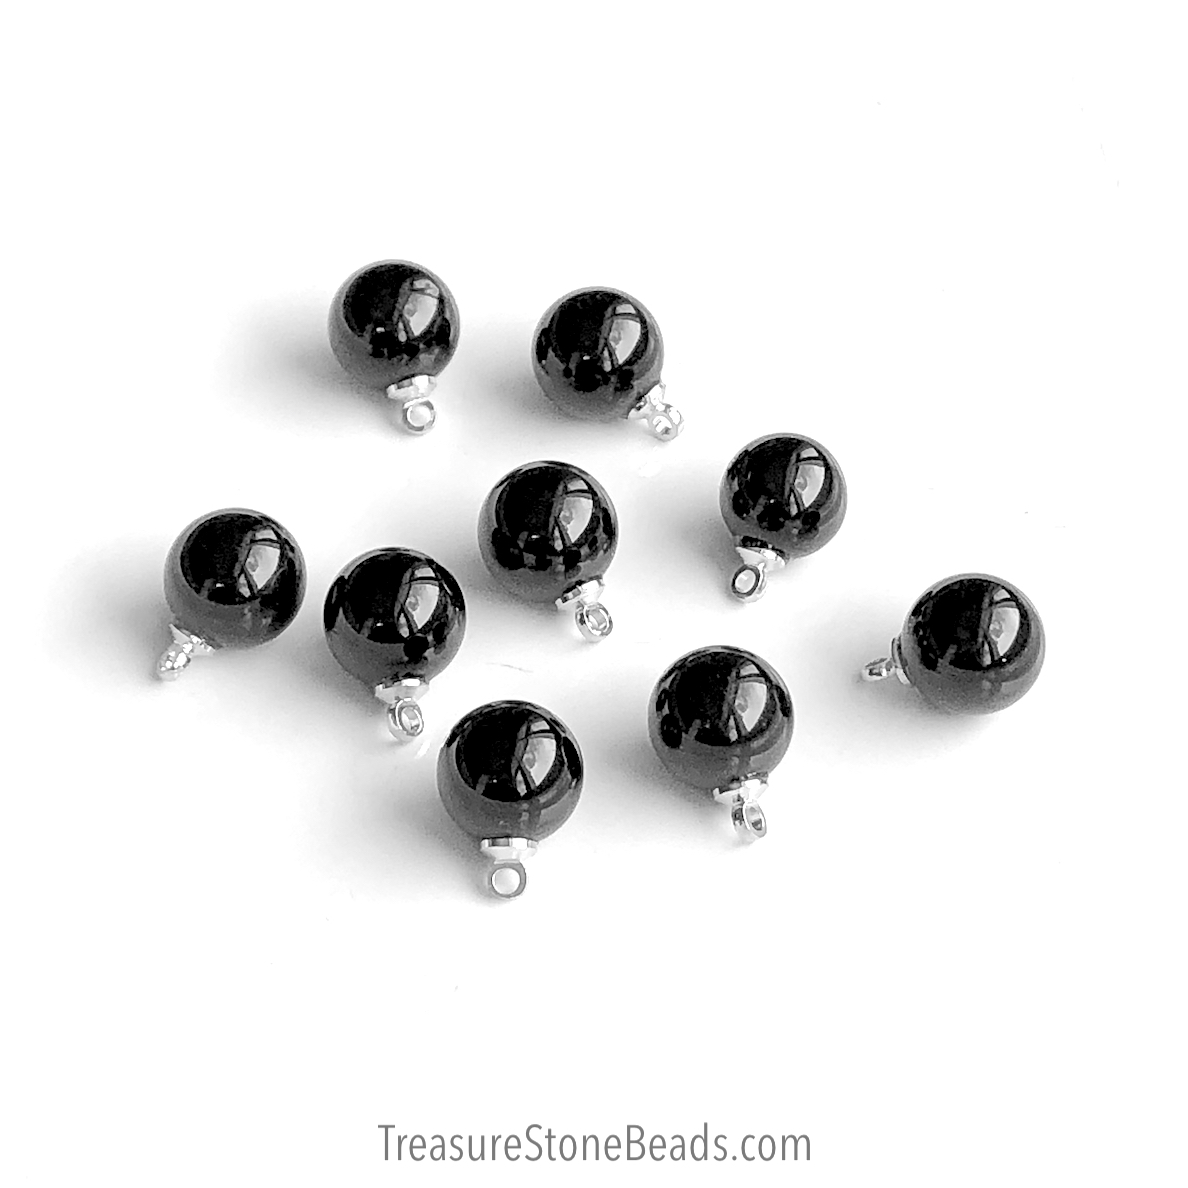 Charm, Pendant, black onyx. 10mm round, silver bail. Pack of 2.